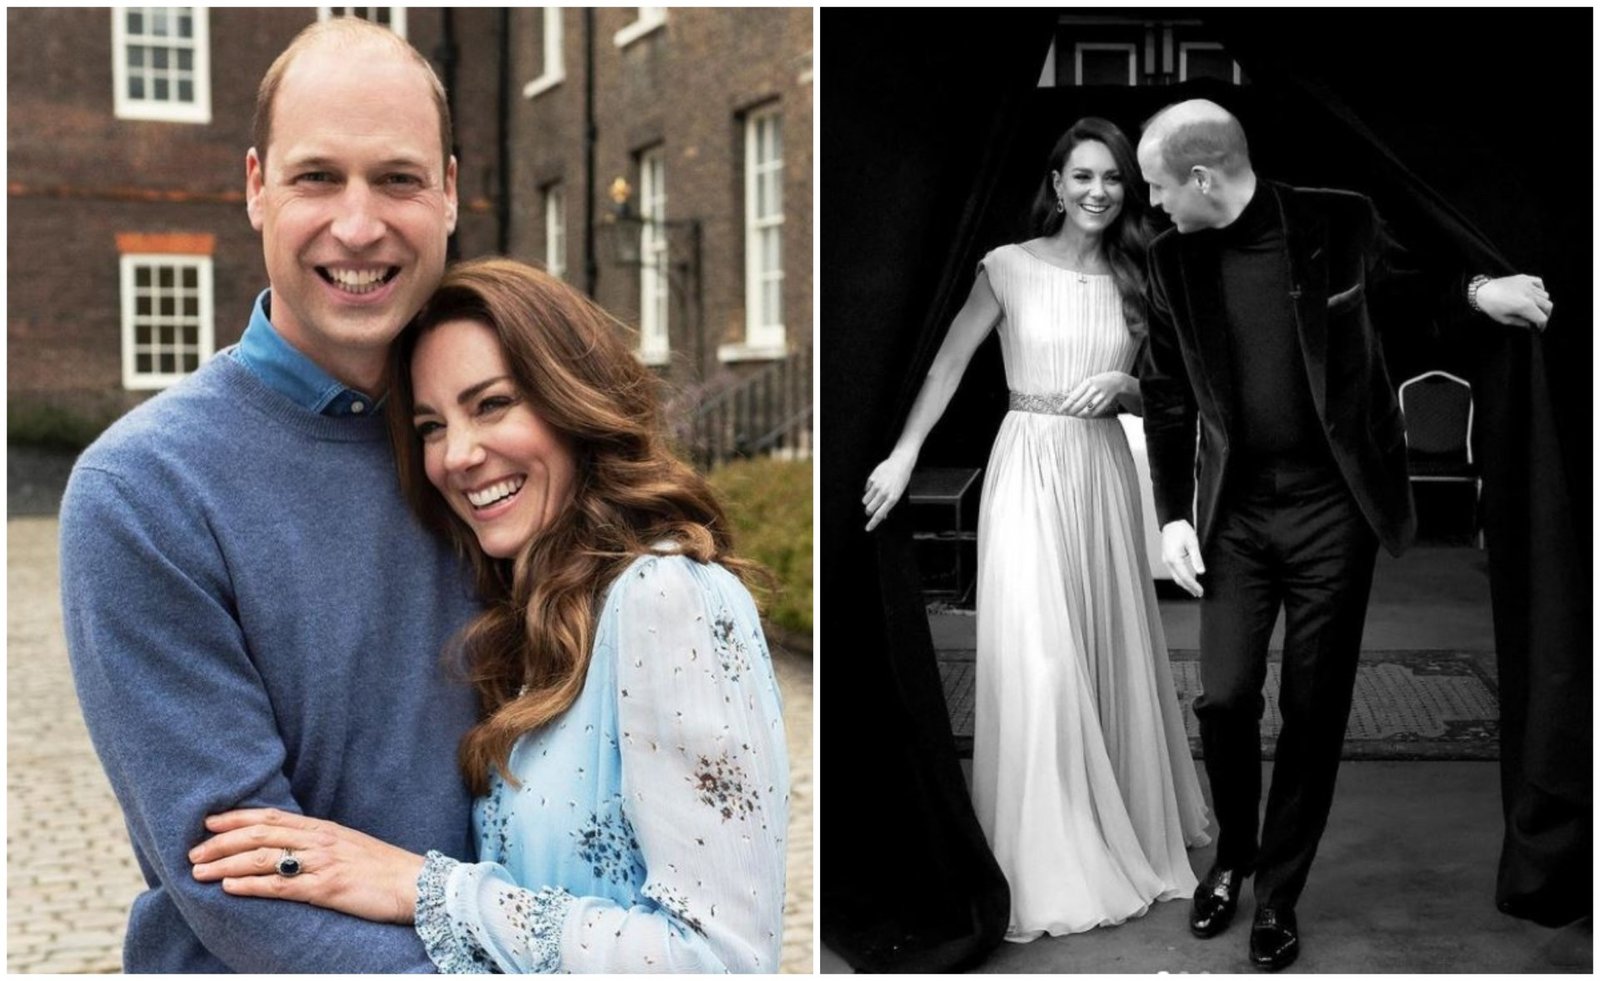 In love like never before: Prince William and Duchess Catherine post an unprecedented photo showing their love